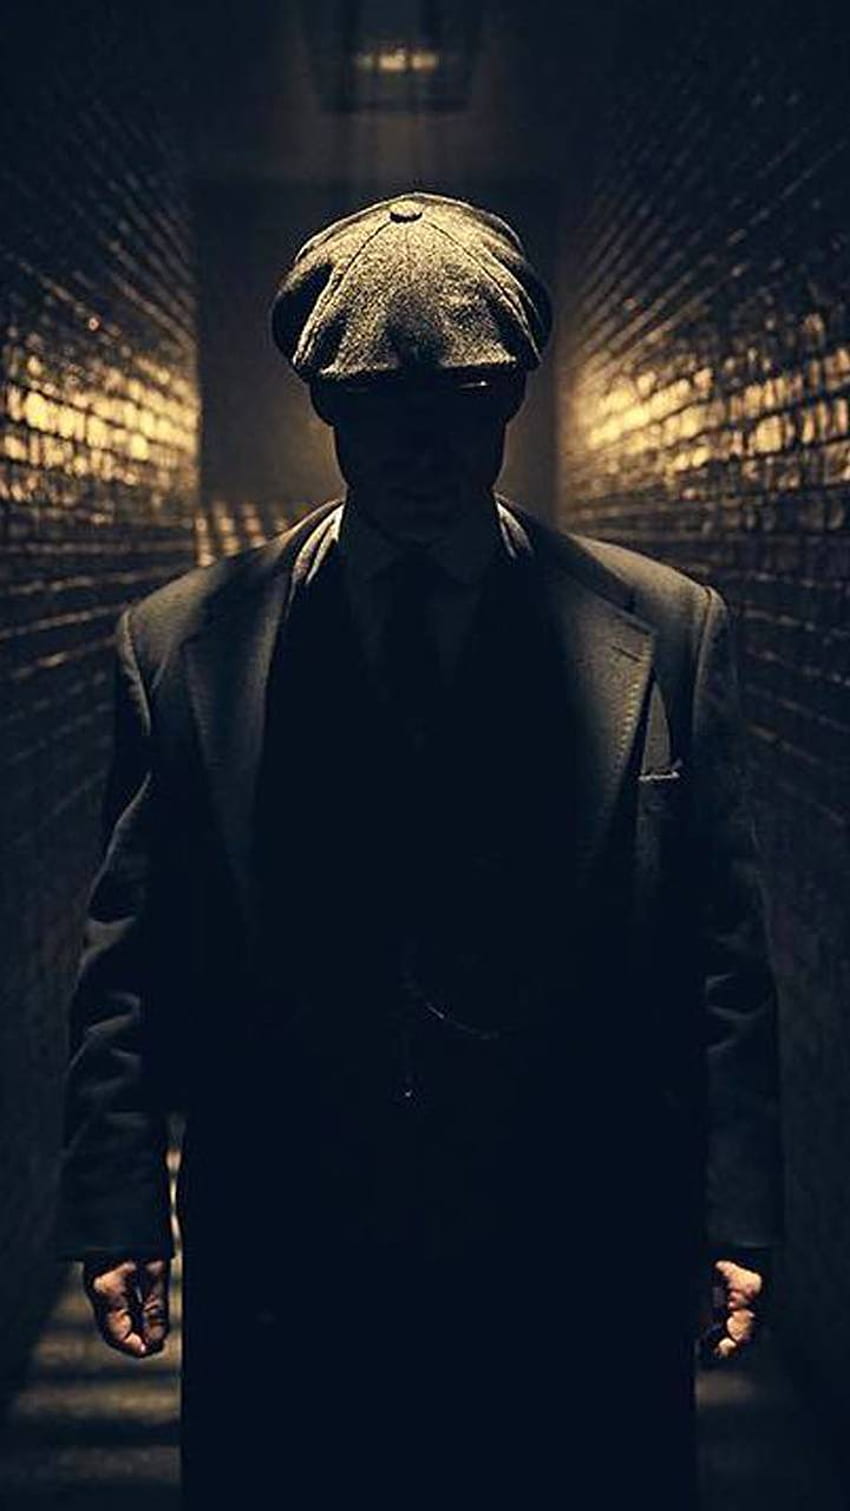 Wallpaper ID 353141  TV Show Peaky Blinders Phone Wallpaper Cillian  Murphy Thomas Shelby 1080x2400 free download